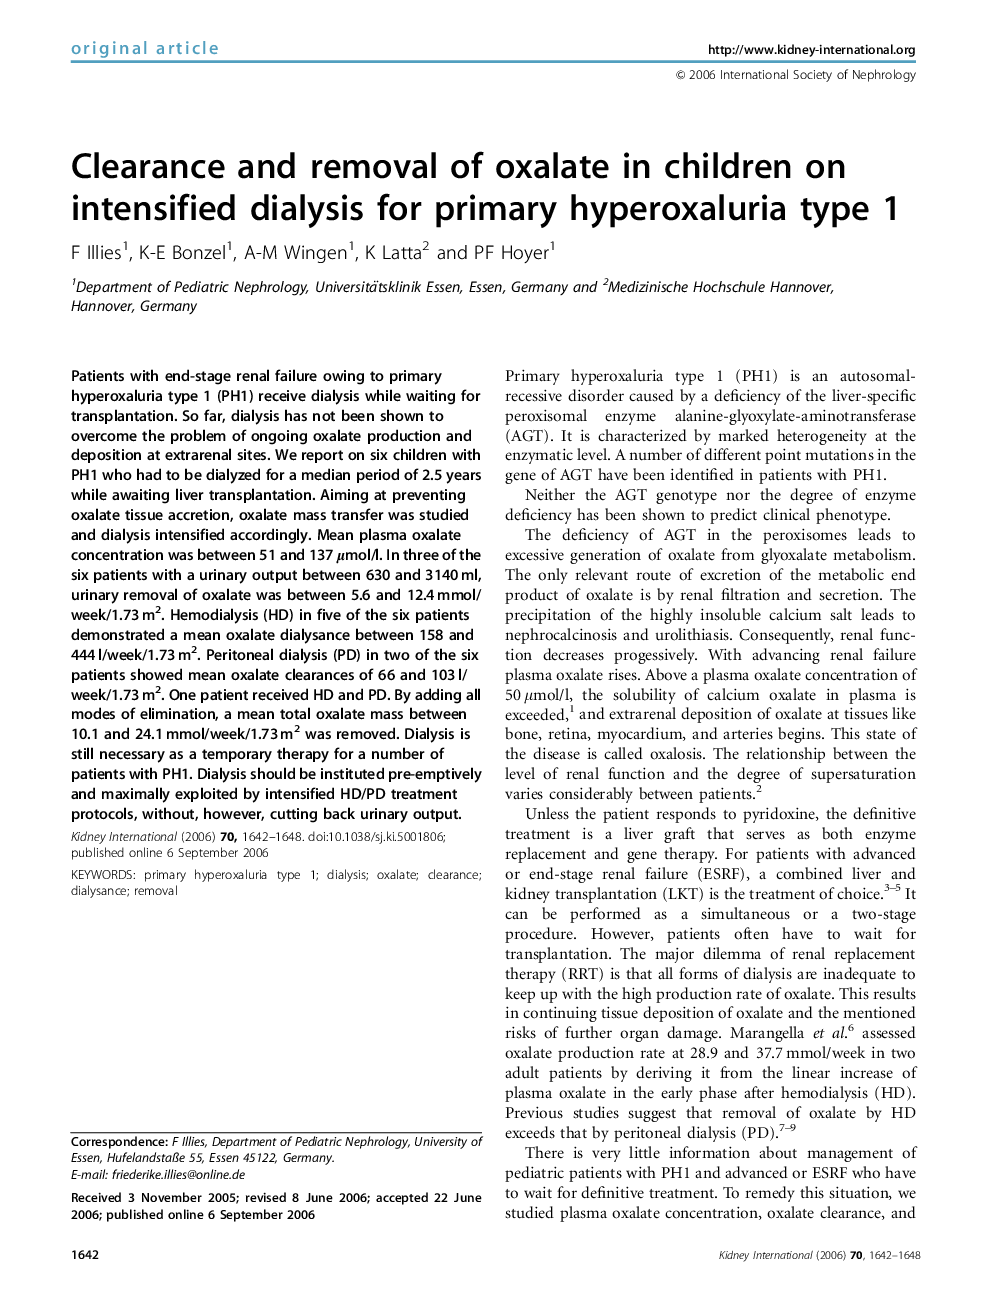 Clearance and removal of oxalate in children on intensified dialysis for primary hyperoxaluria type 1